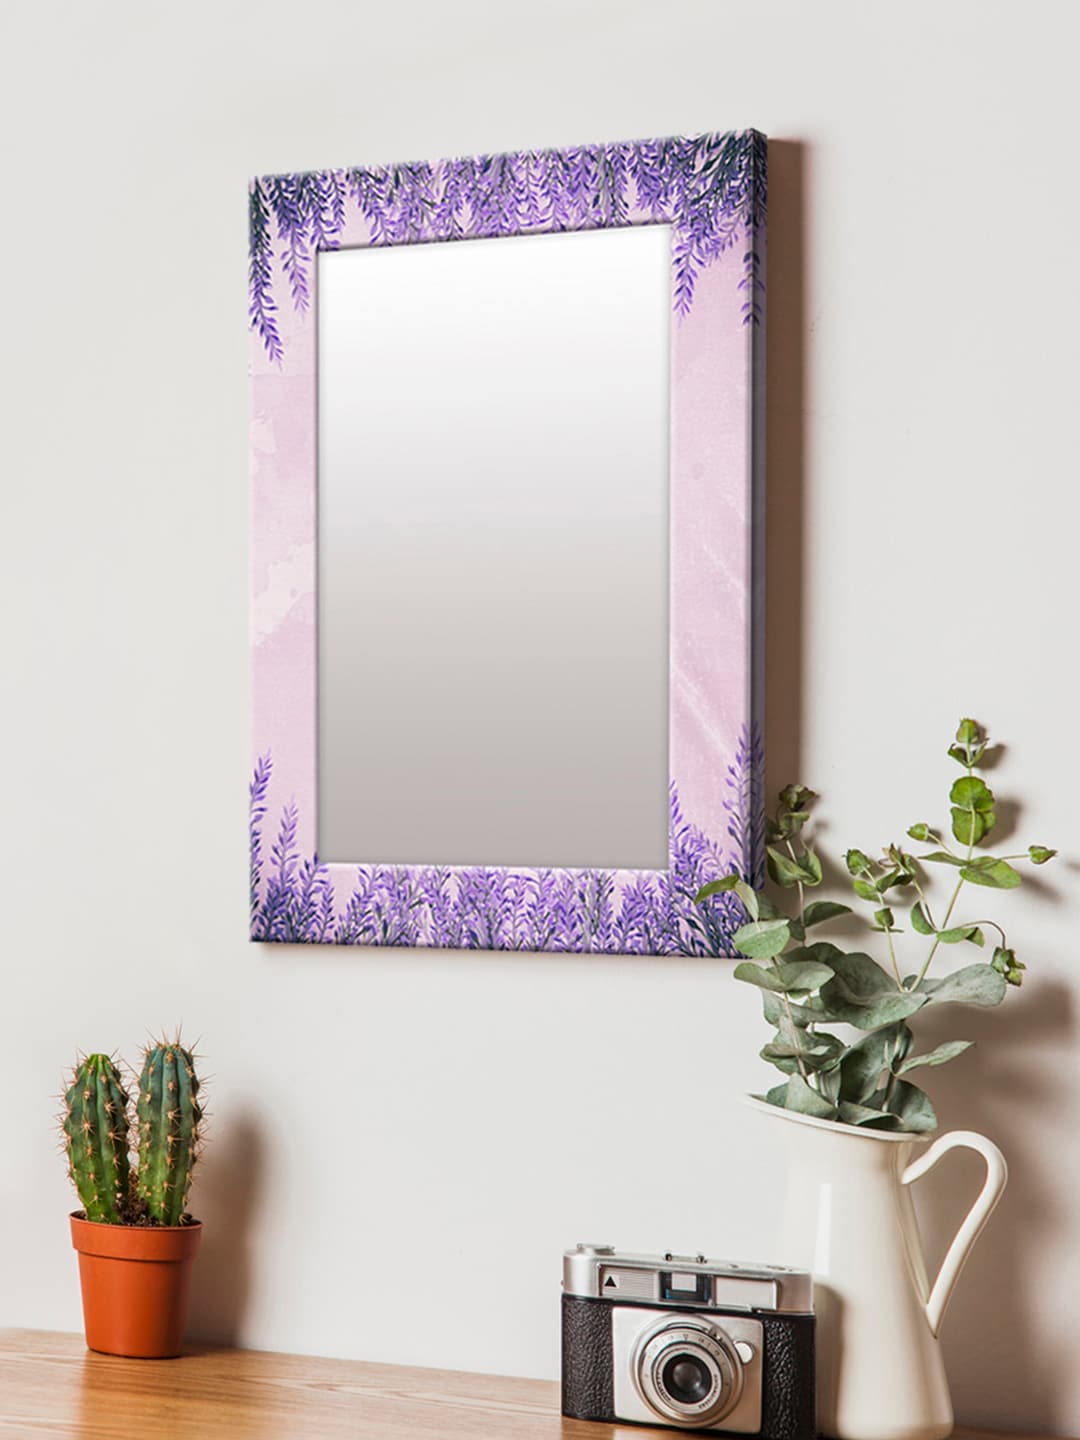 999Store Violet Printed MDF Wall Mirror Price in India